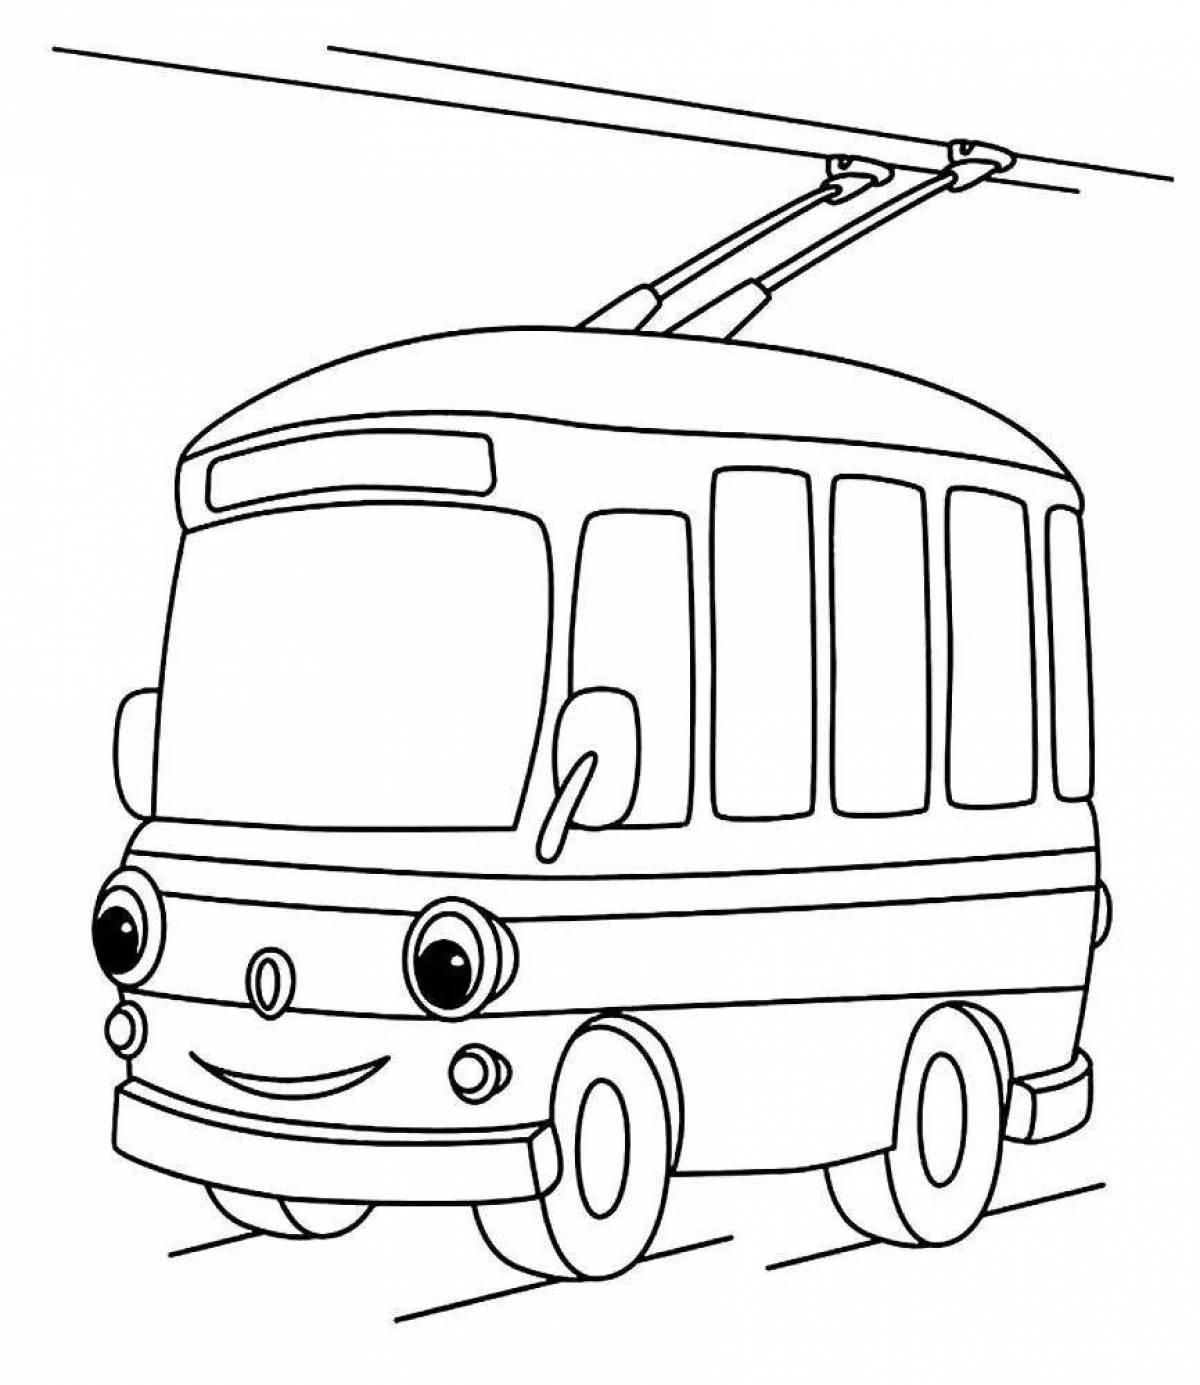 Living transport coloring book for children 3-4 years old